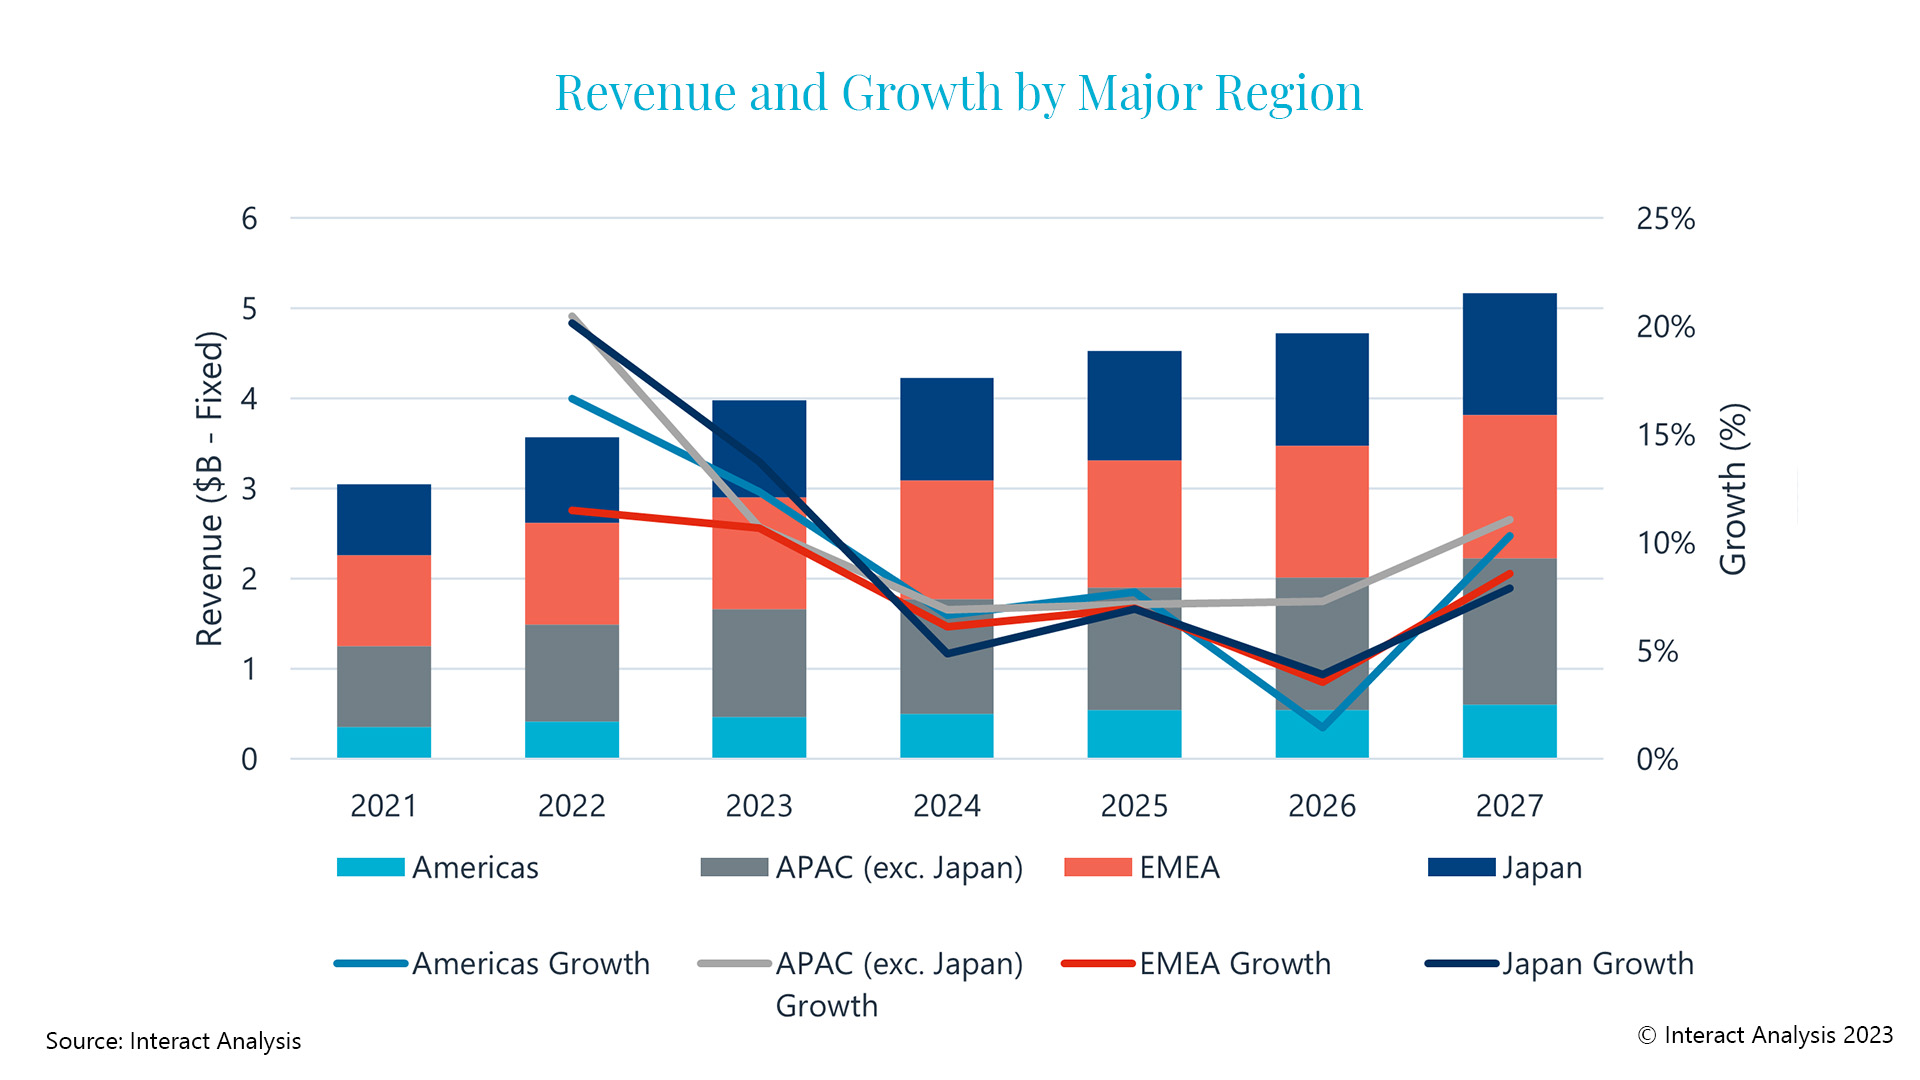 APAC is the fastest growing market for precision gear products, growing by 20.5% in 2022.